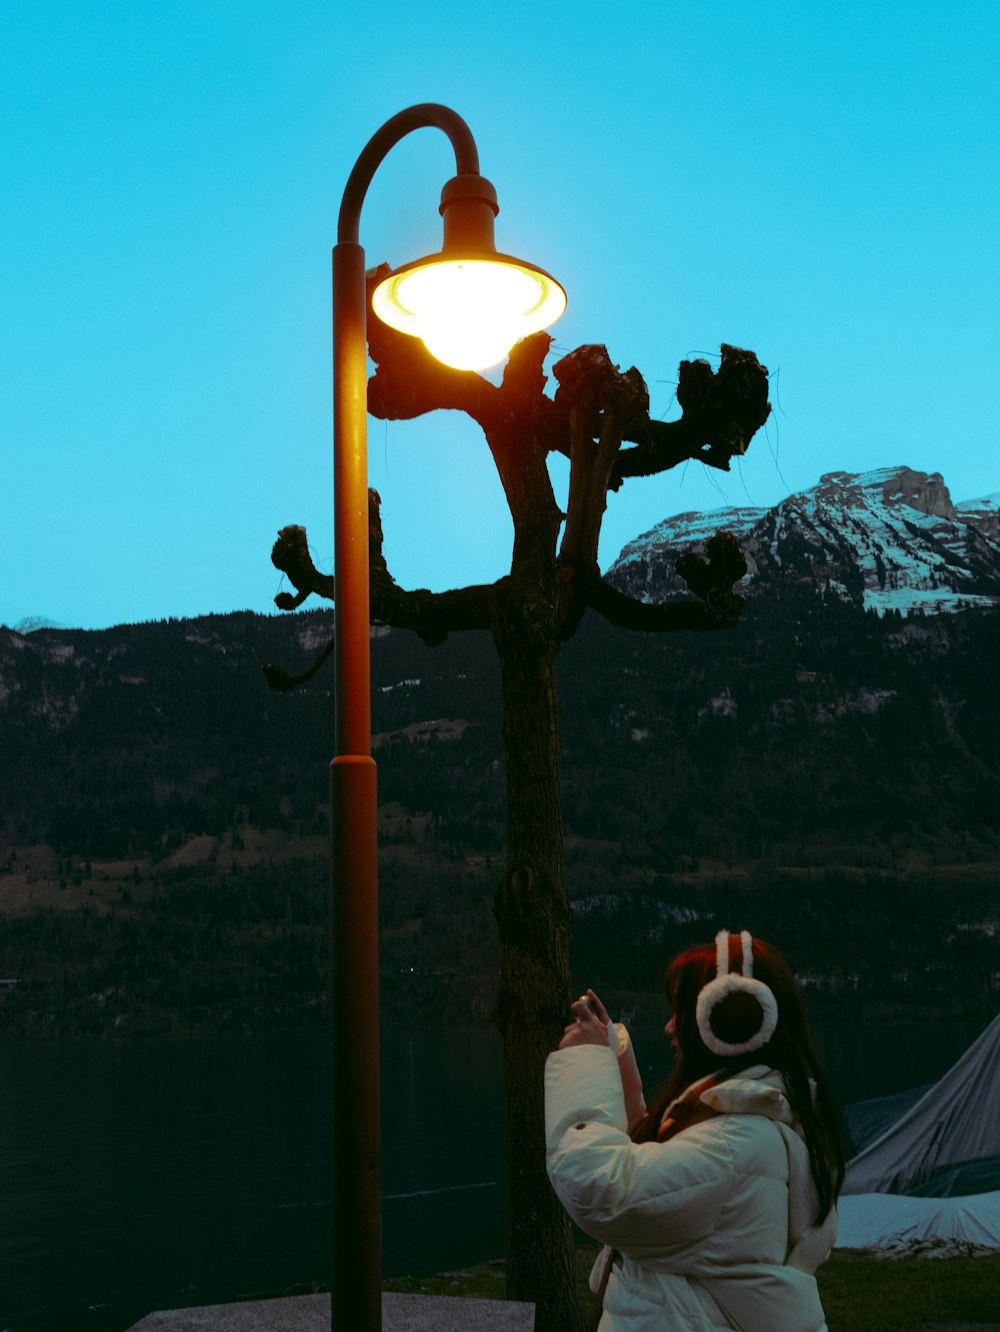 a person taking a picture of a street light